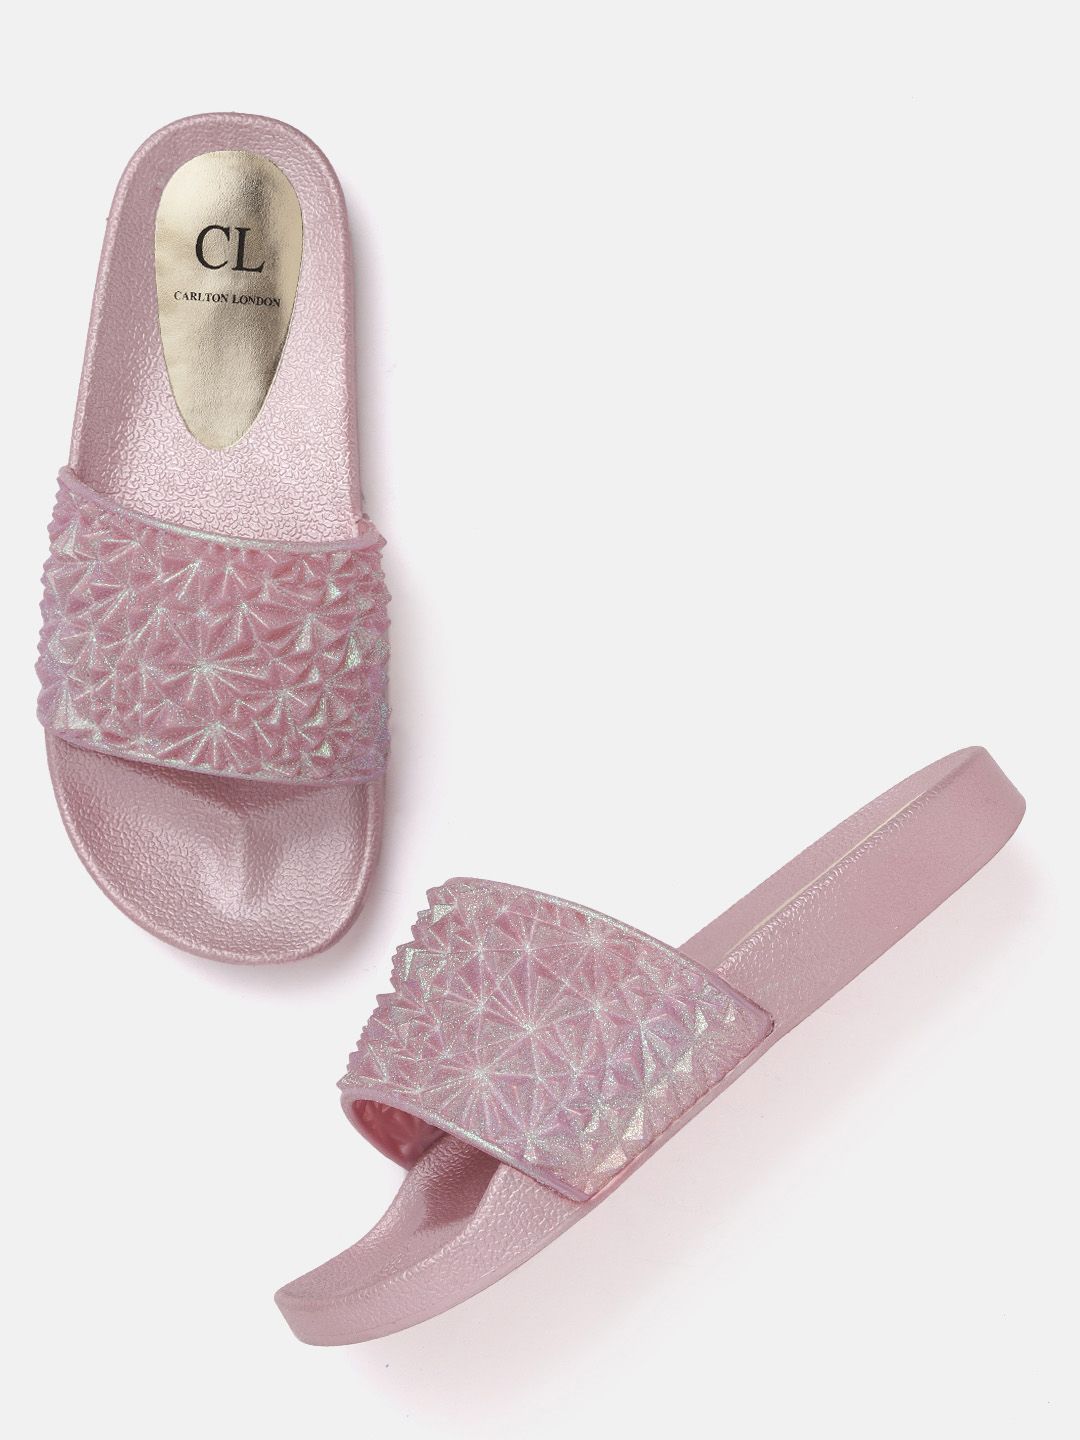 Carlton London Women Pink Textured Shimmer Open Toe Flats Price in India